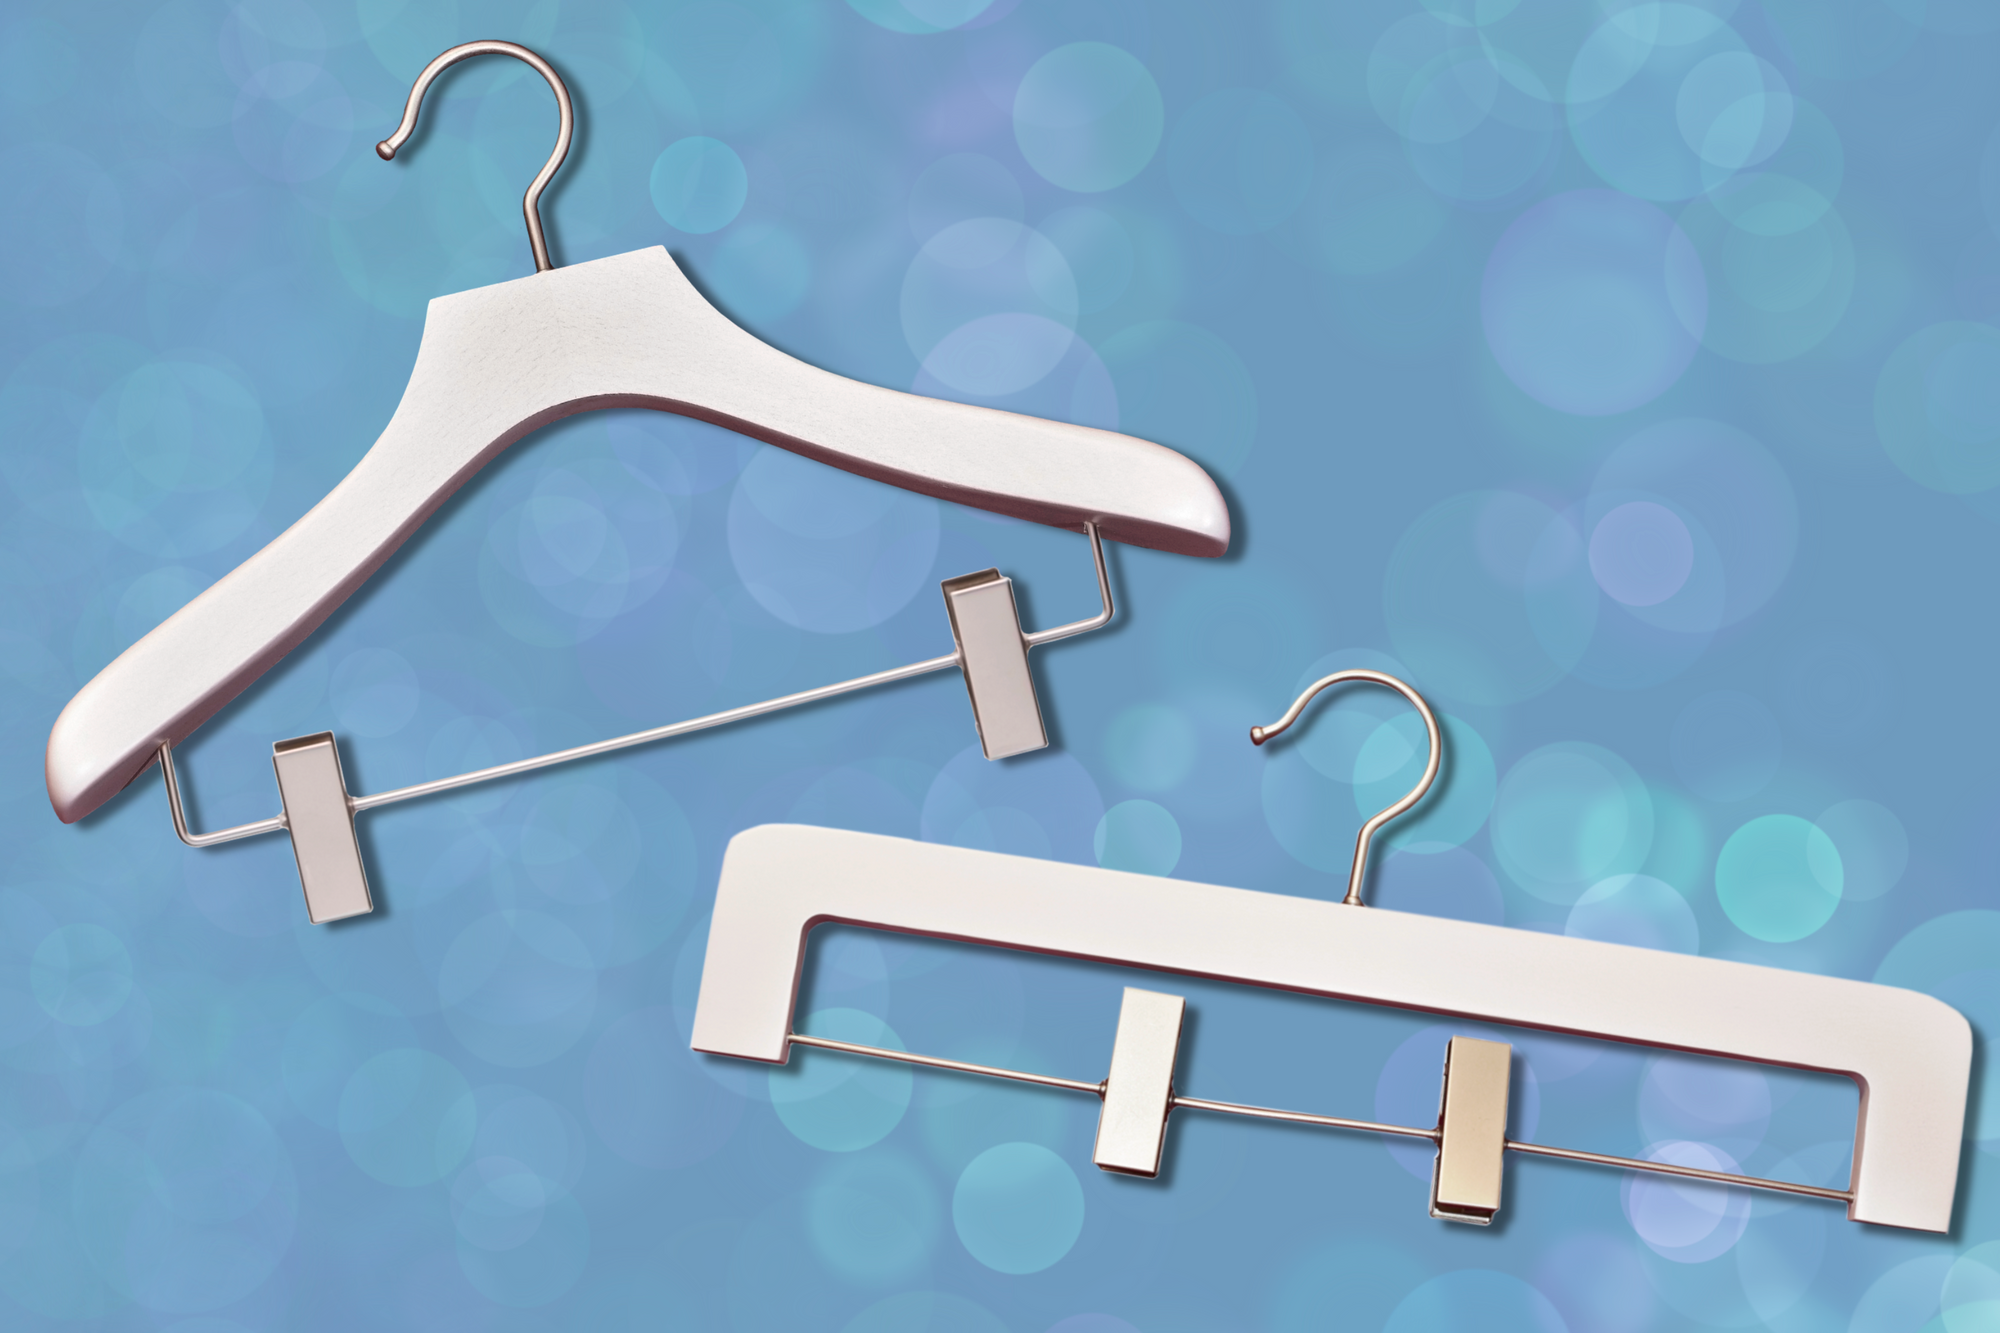 Rosewood Tailor Made® Suit Hanger